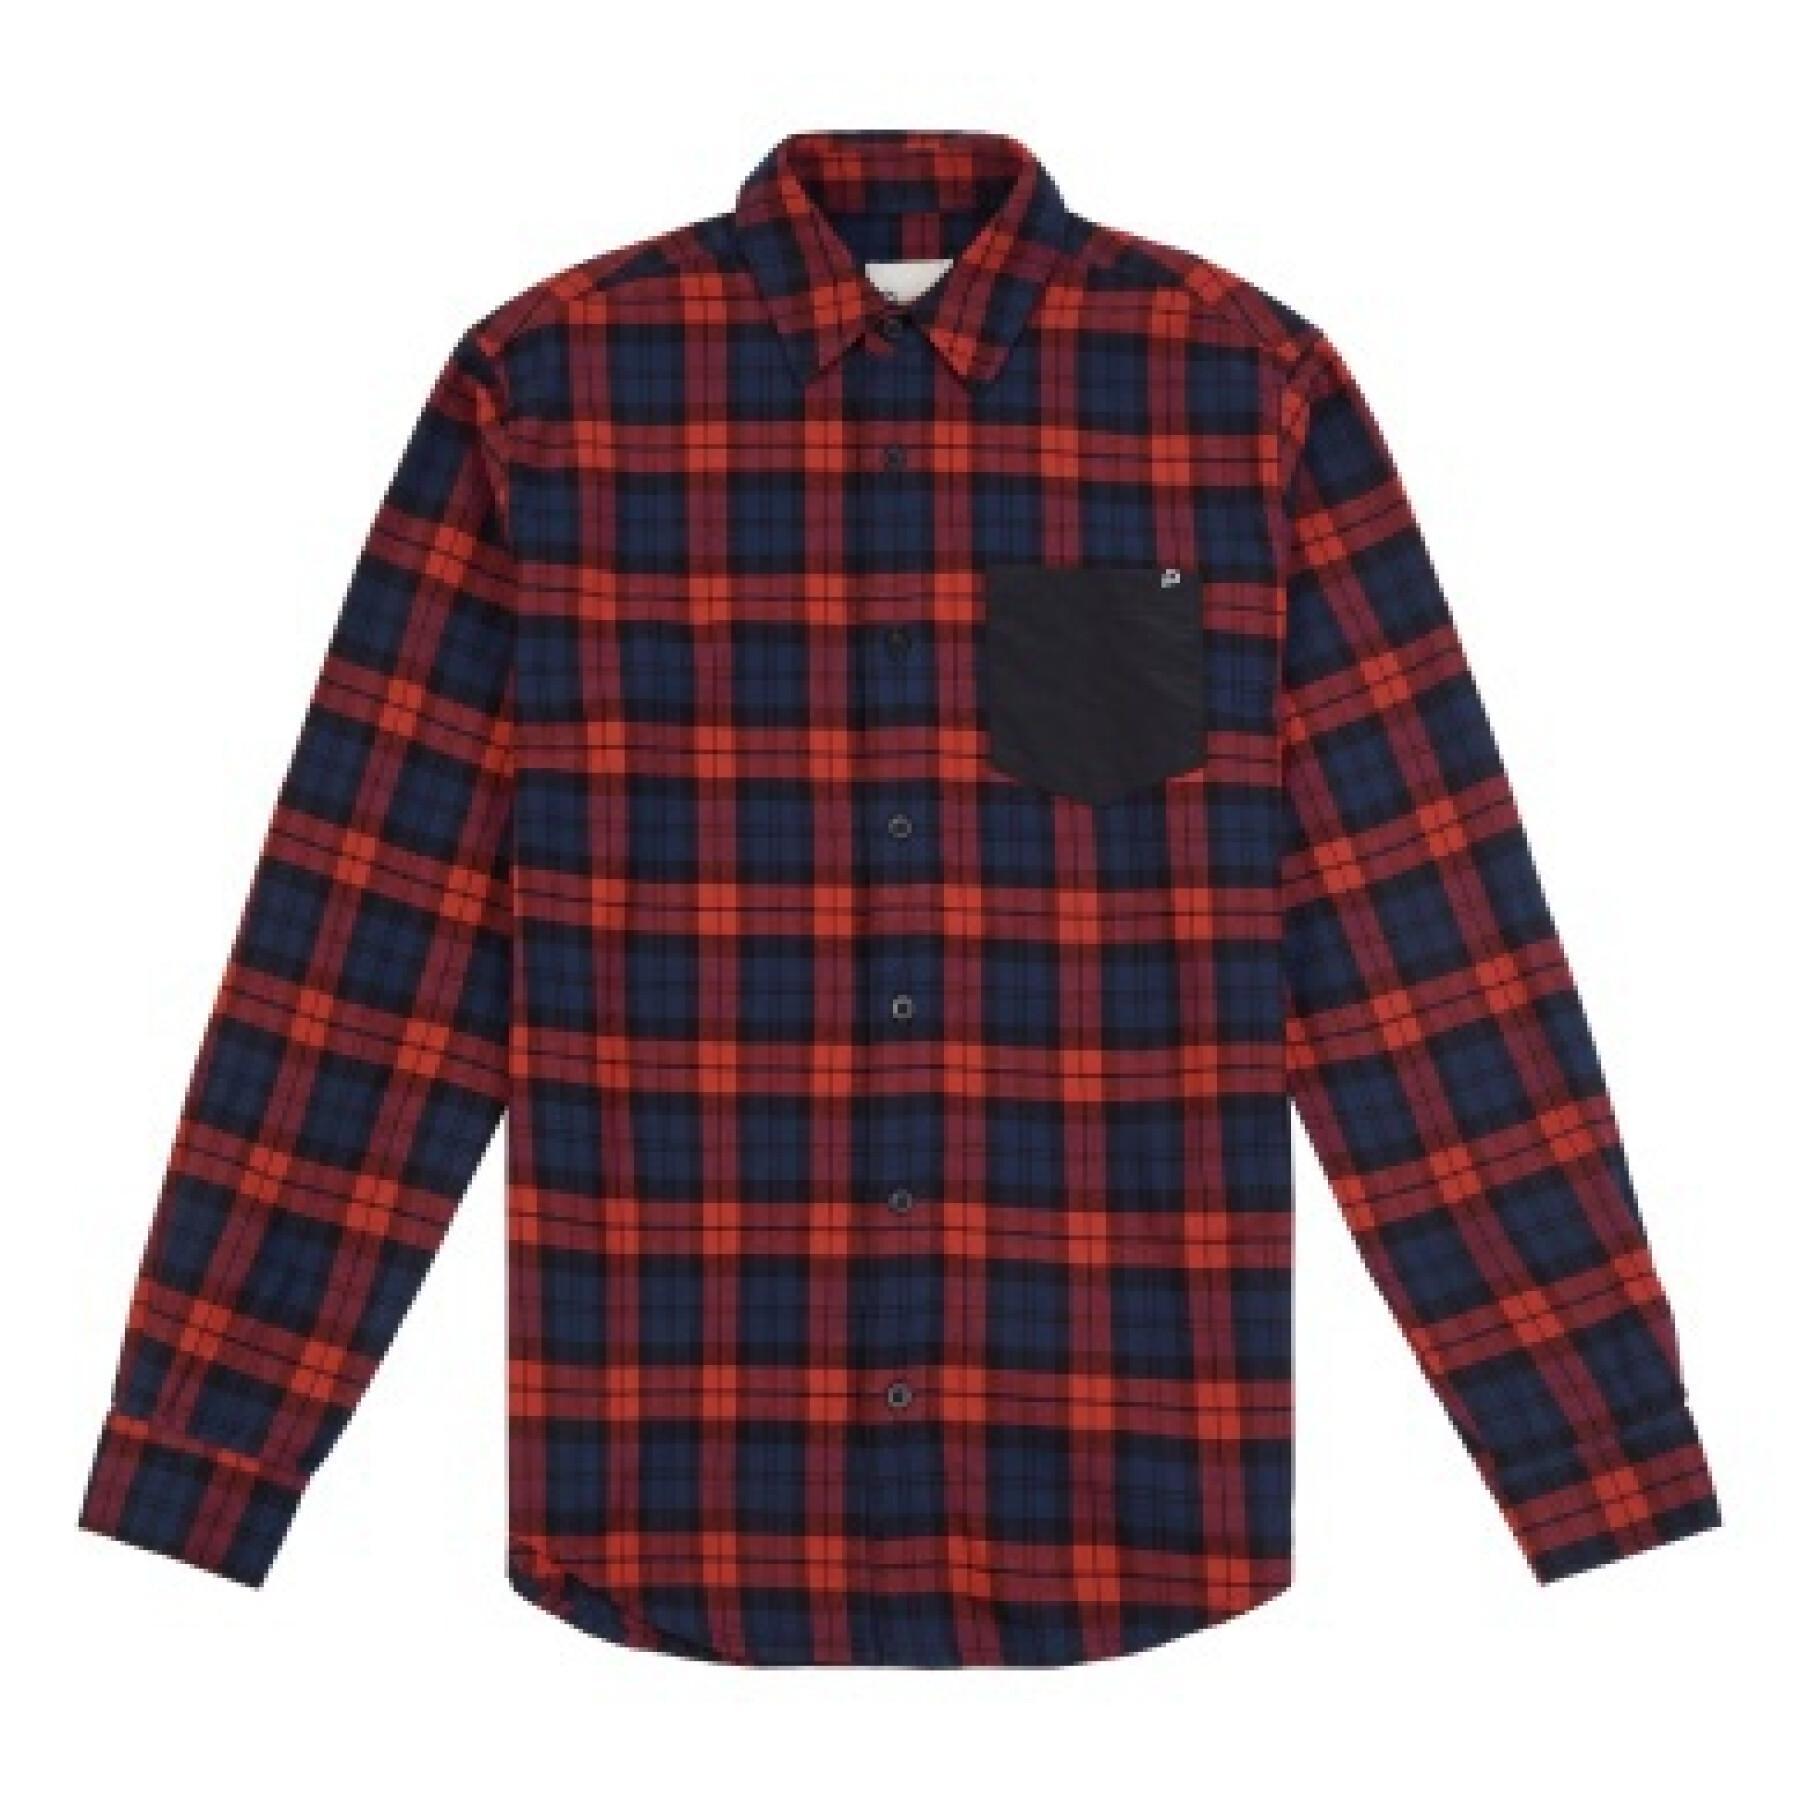 Penfield classic checked shirt